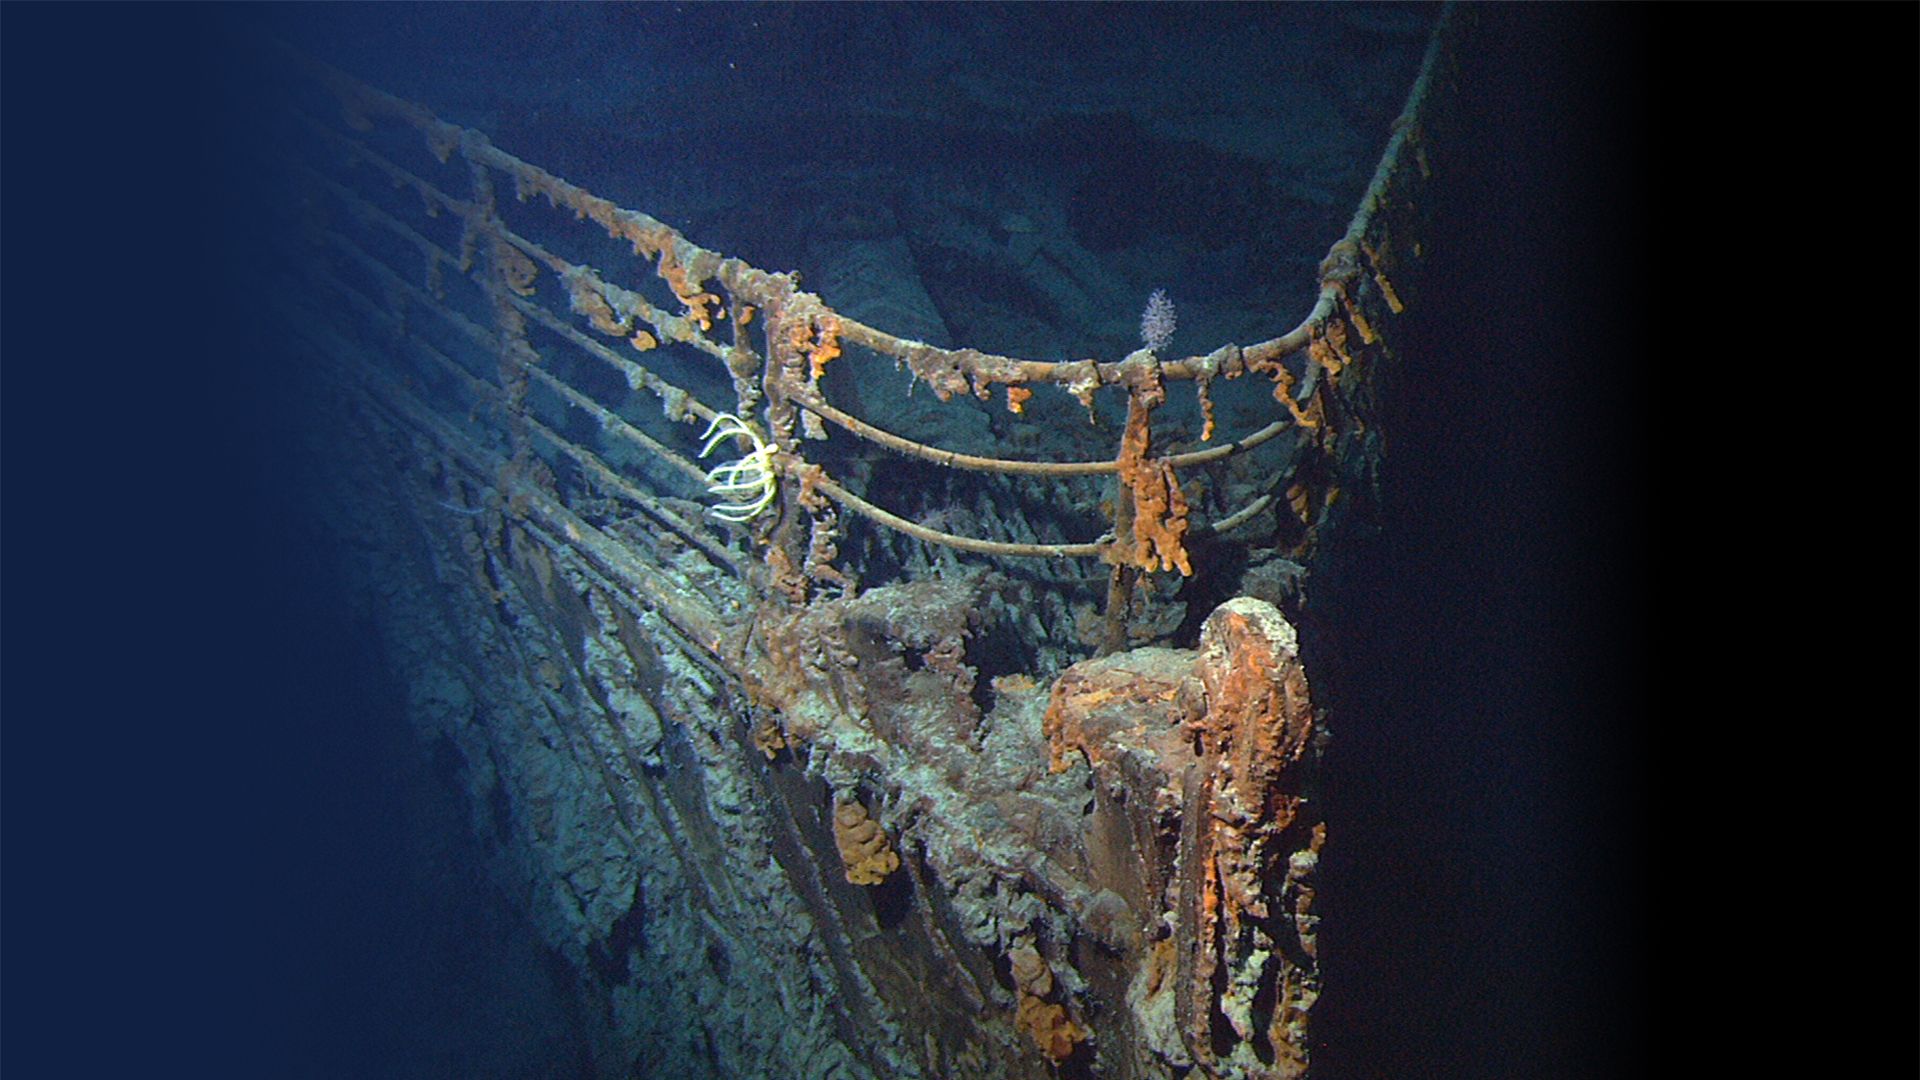 New Footage of the Titanic Has Some Experts Predicting